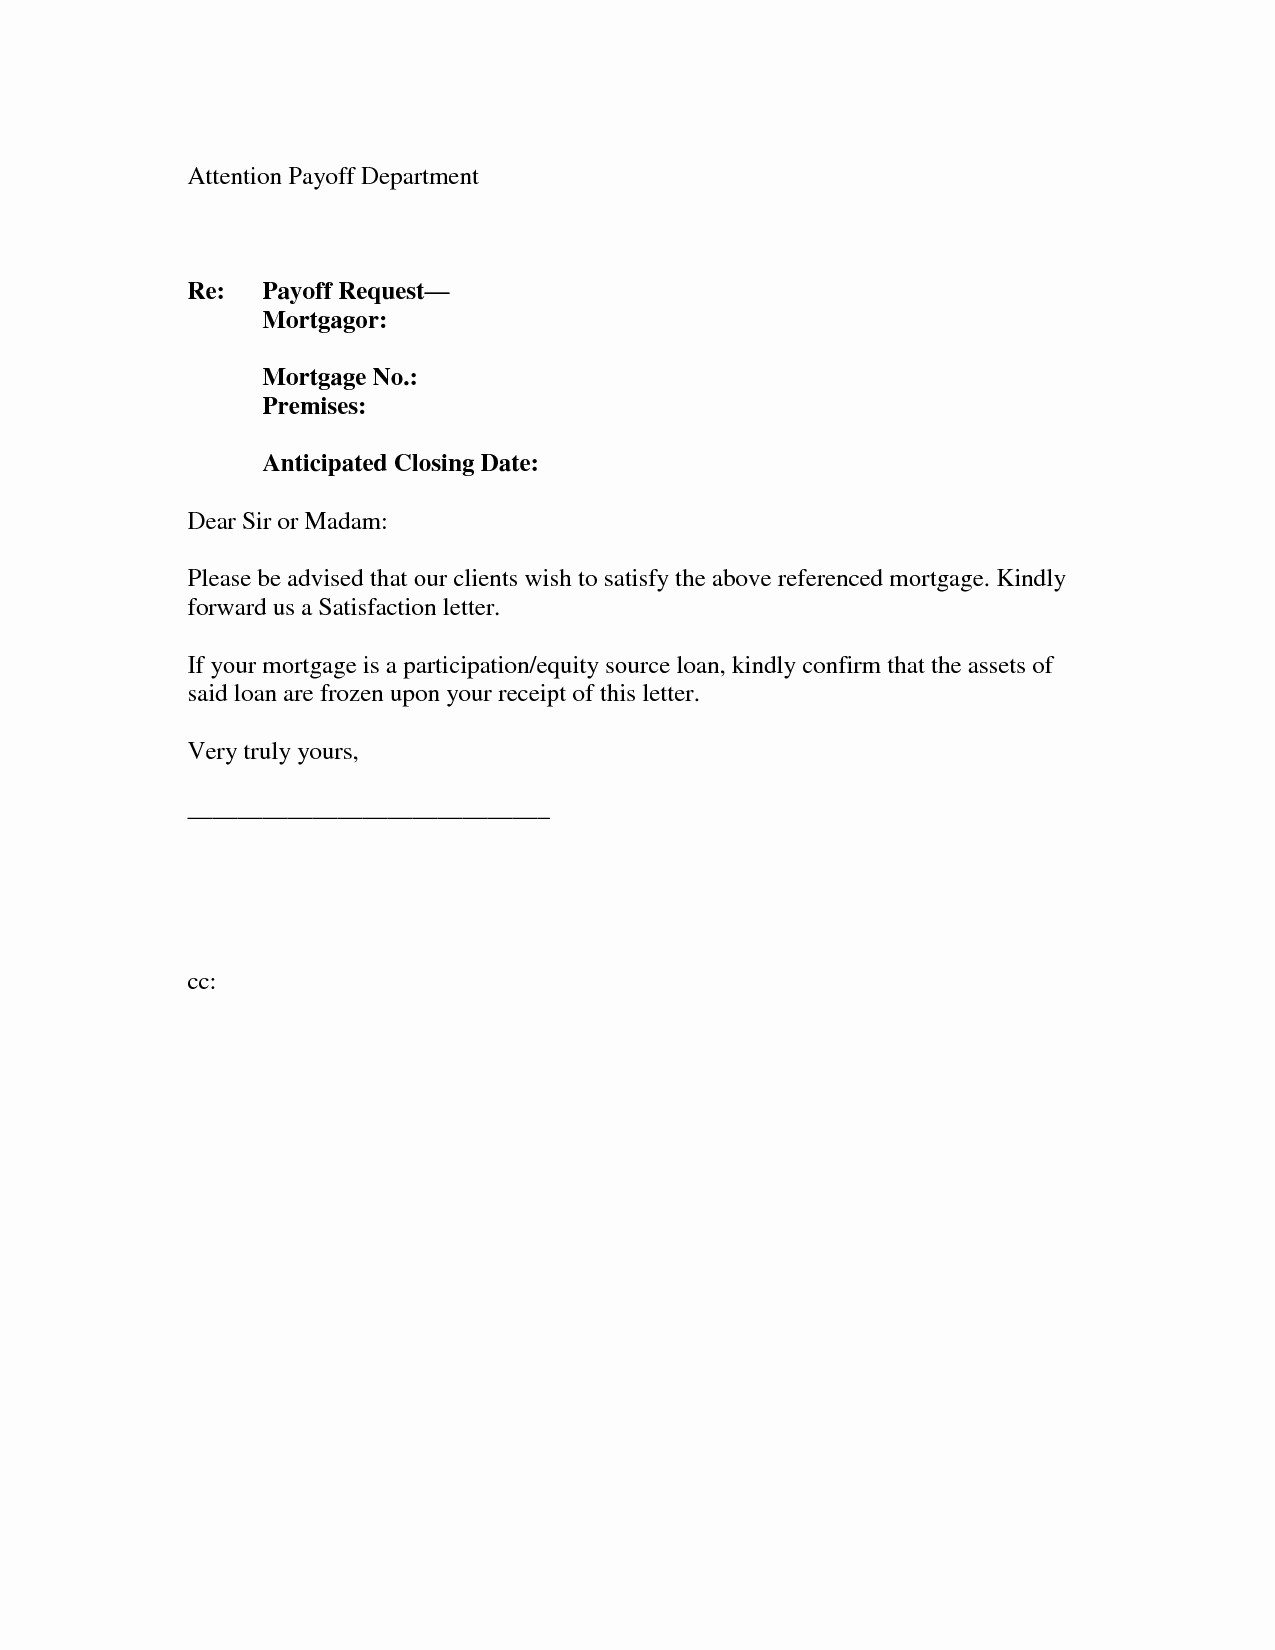 mortgage-payoff-letter-template-examples-letter-template-collection